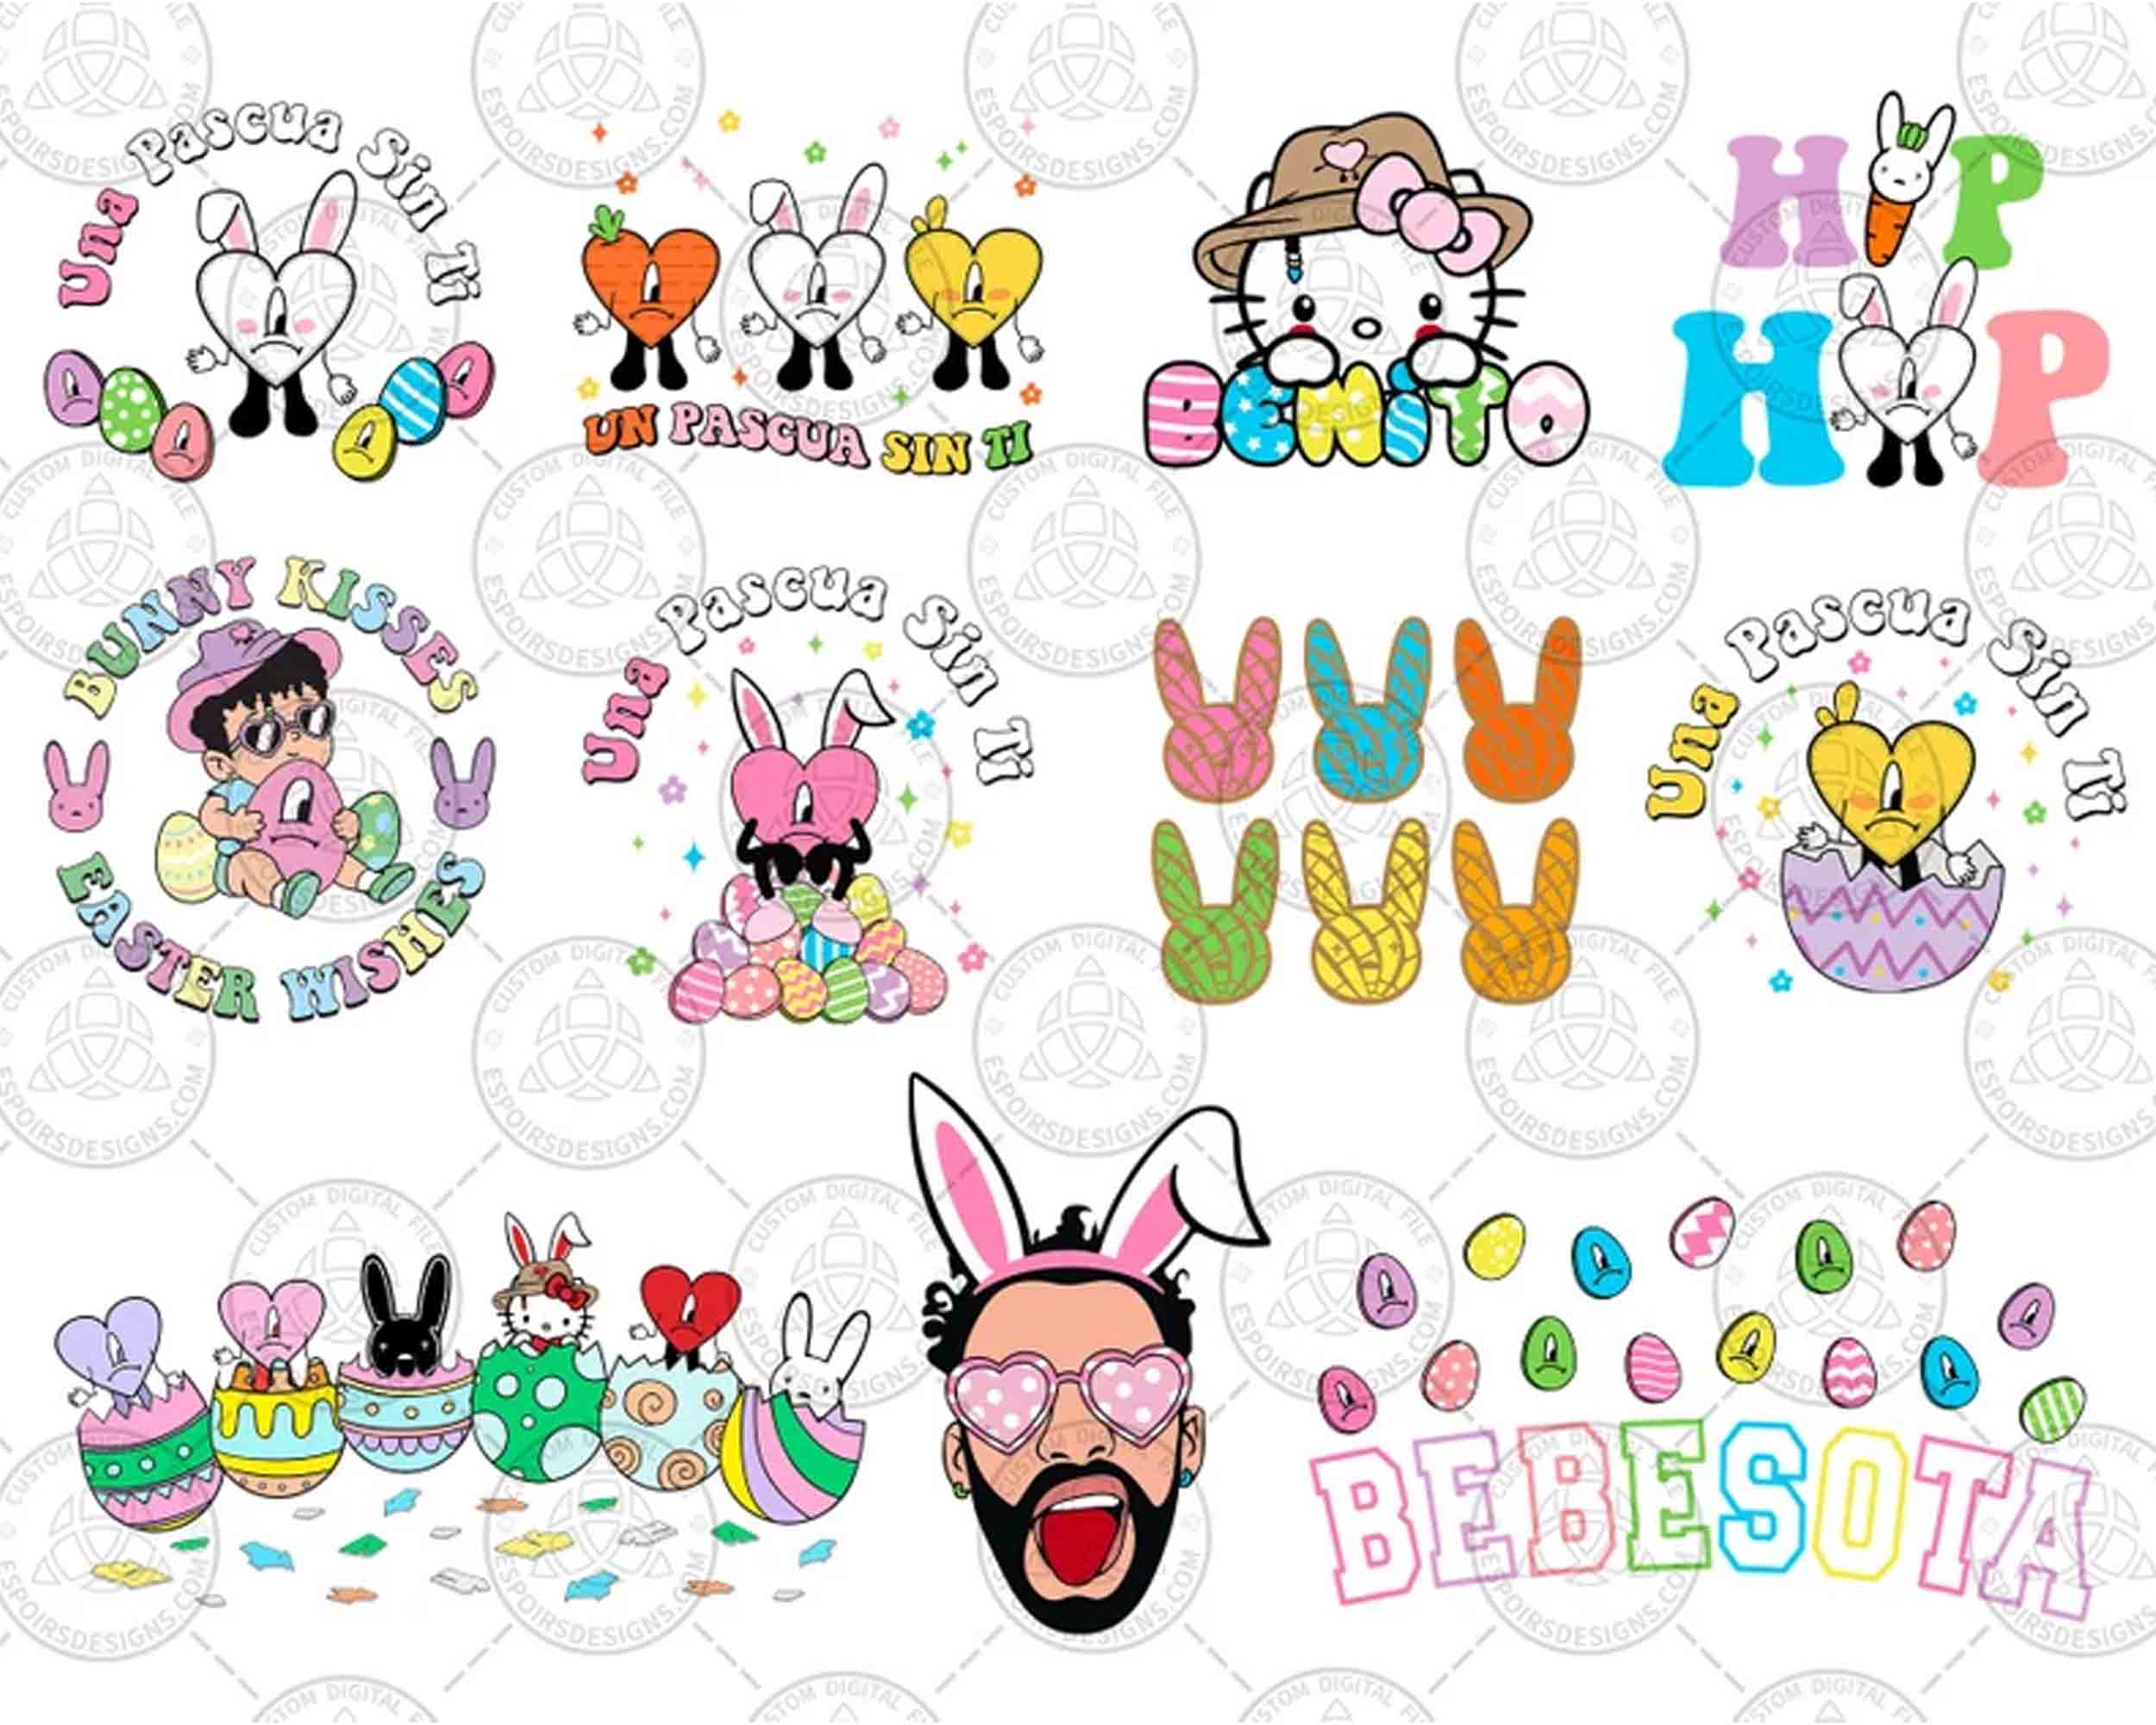 25+ Easter Day Bad Bunny Png Bundle, Bad Bunny Svg, Easter Png, Easter Benito Png, Un Pascua Sin Ti , Instant Download